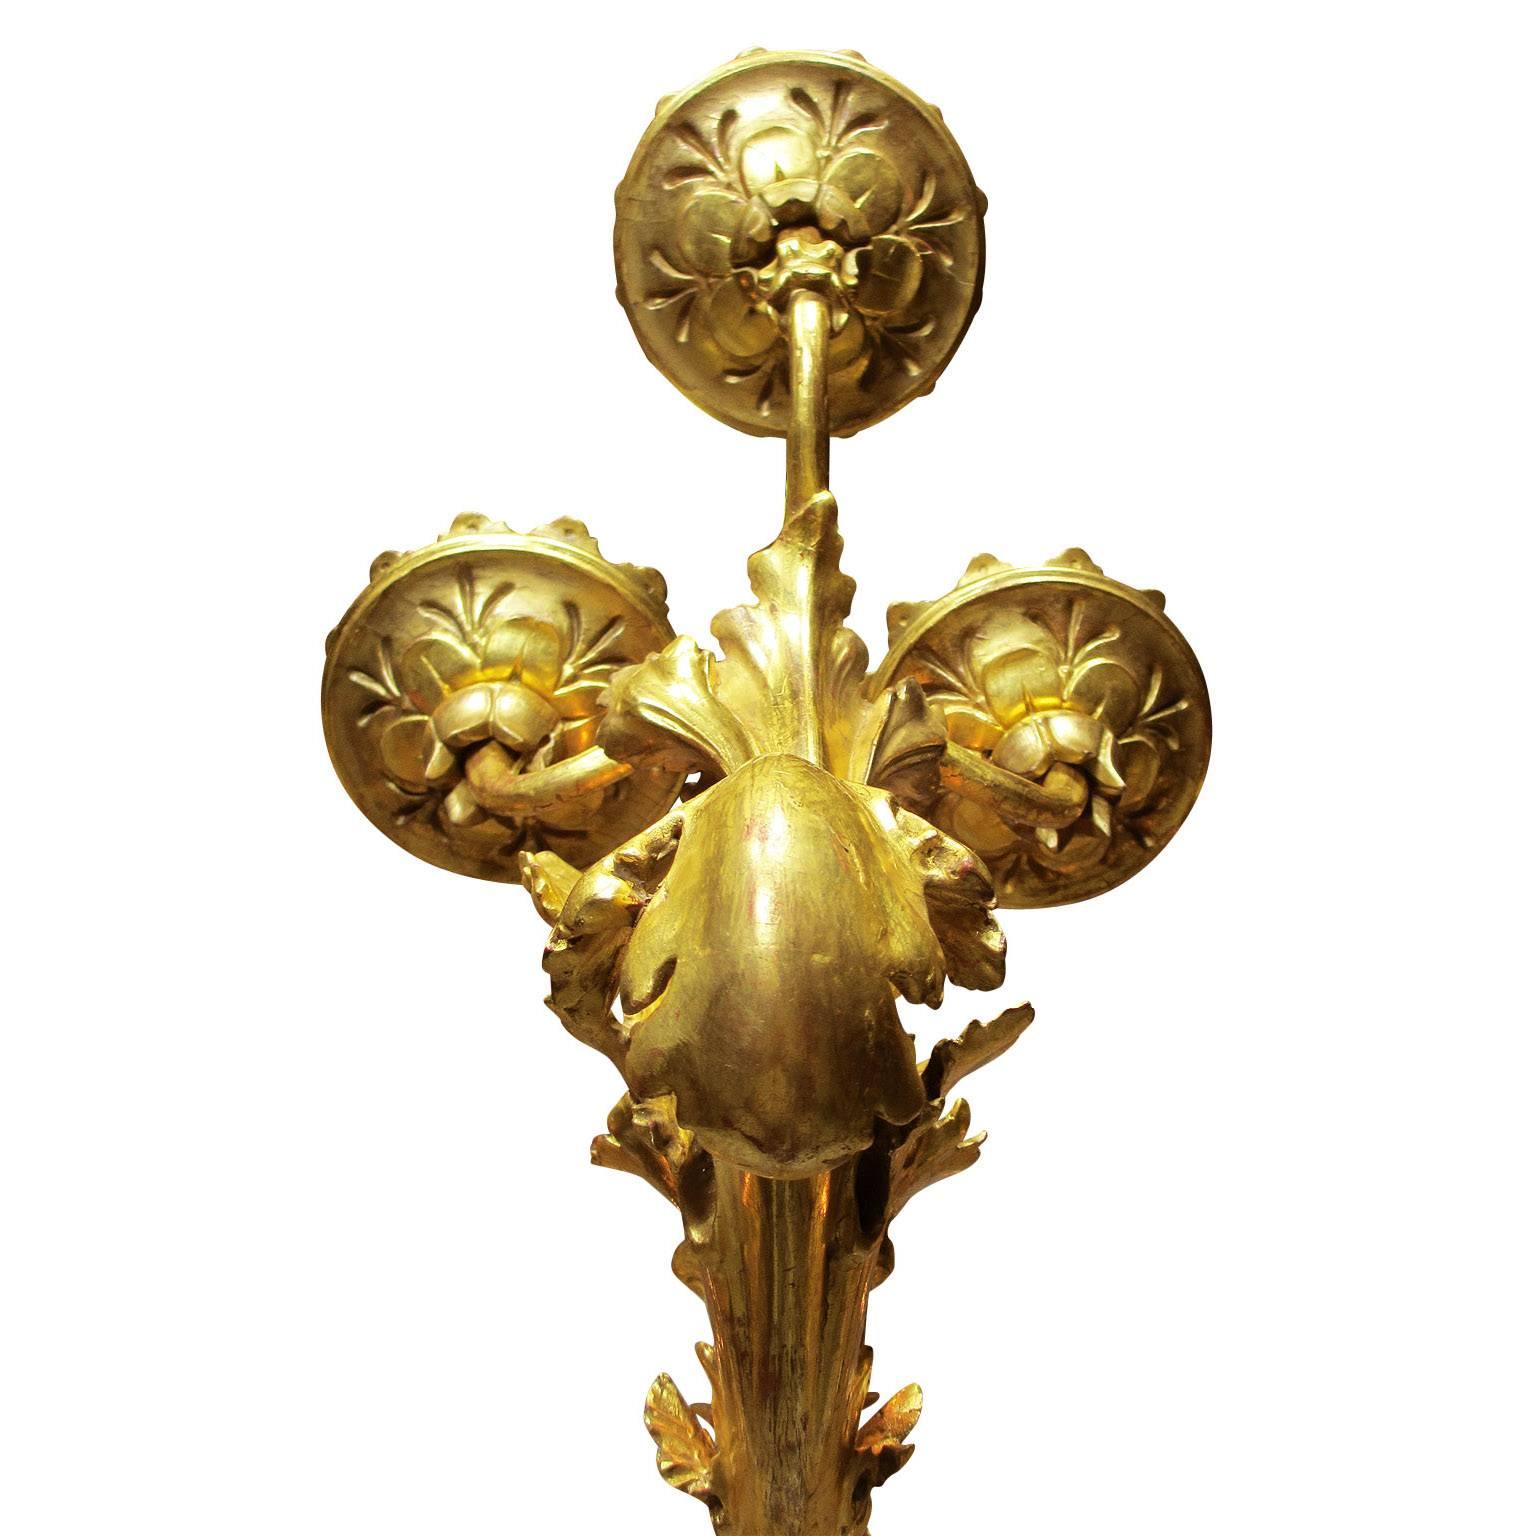 Palatial Italian 19th Century Florentine Rococo Giltwood Carved Chandelier For Sale 2